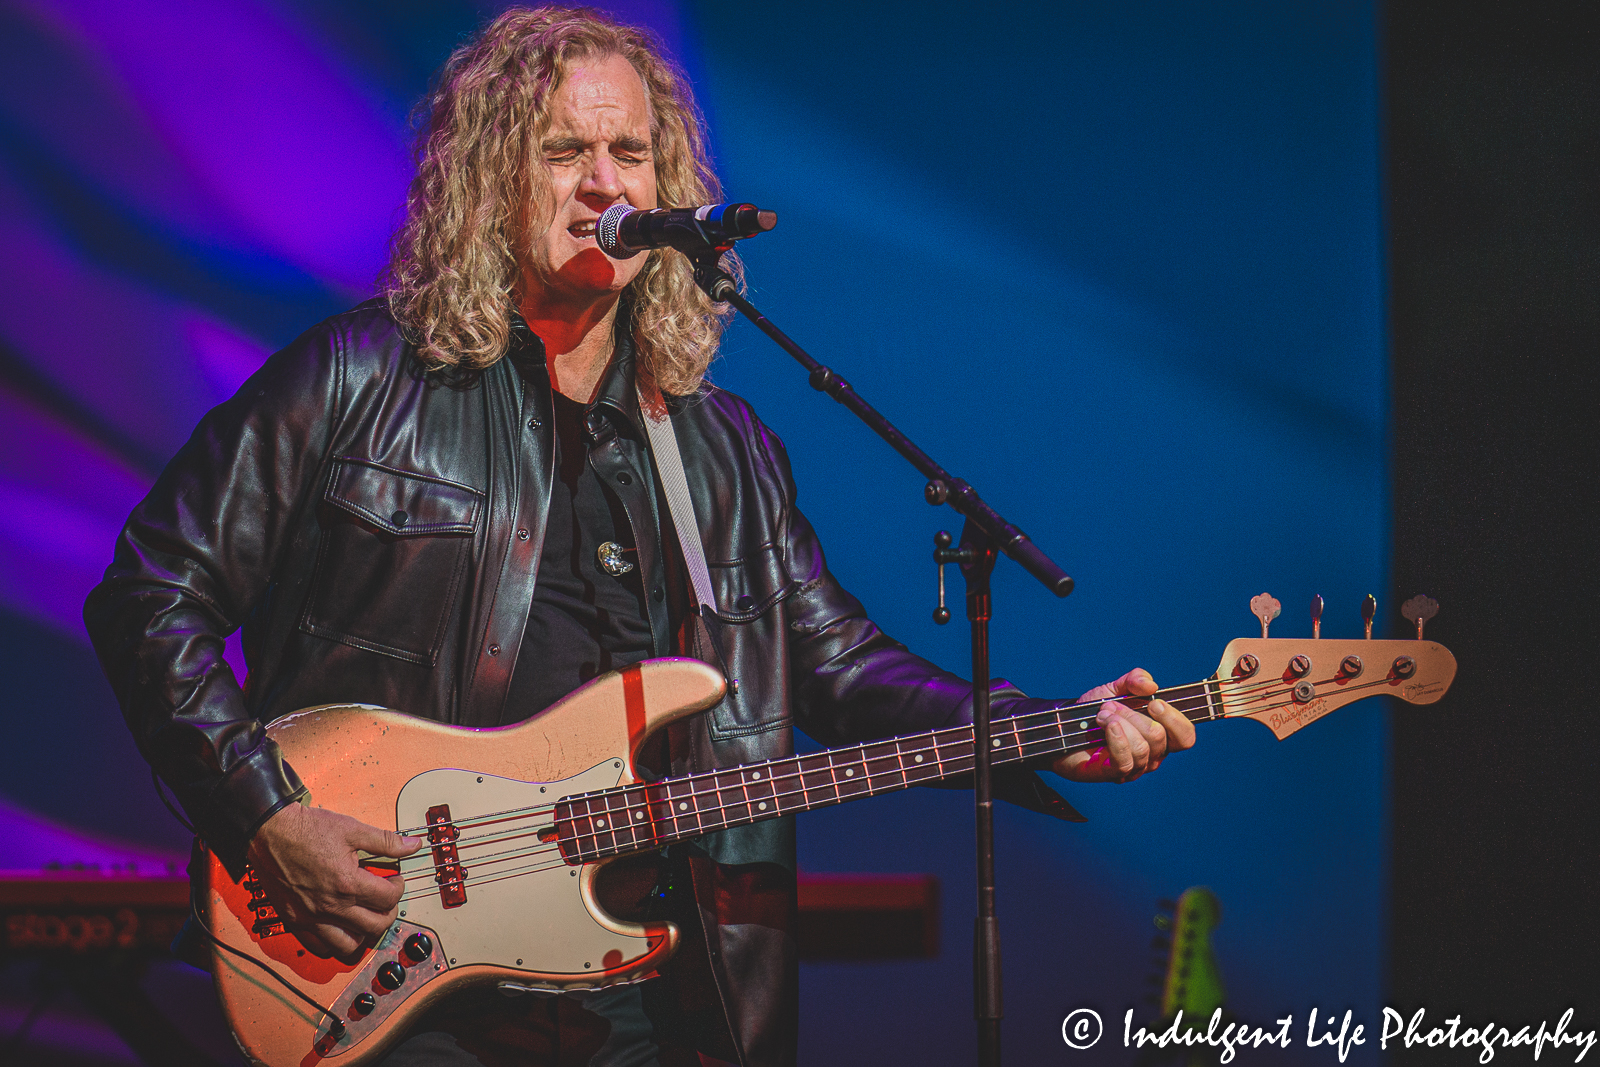 Long-time Chicago frontman and bass guitarist Jason Scheff performing live at Kauffman Center for the Performing Arts in Kansas City, MO on March 27, 2022.